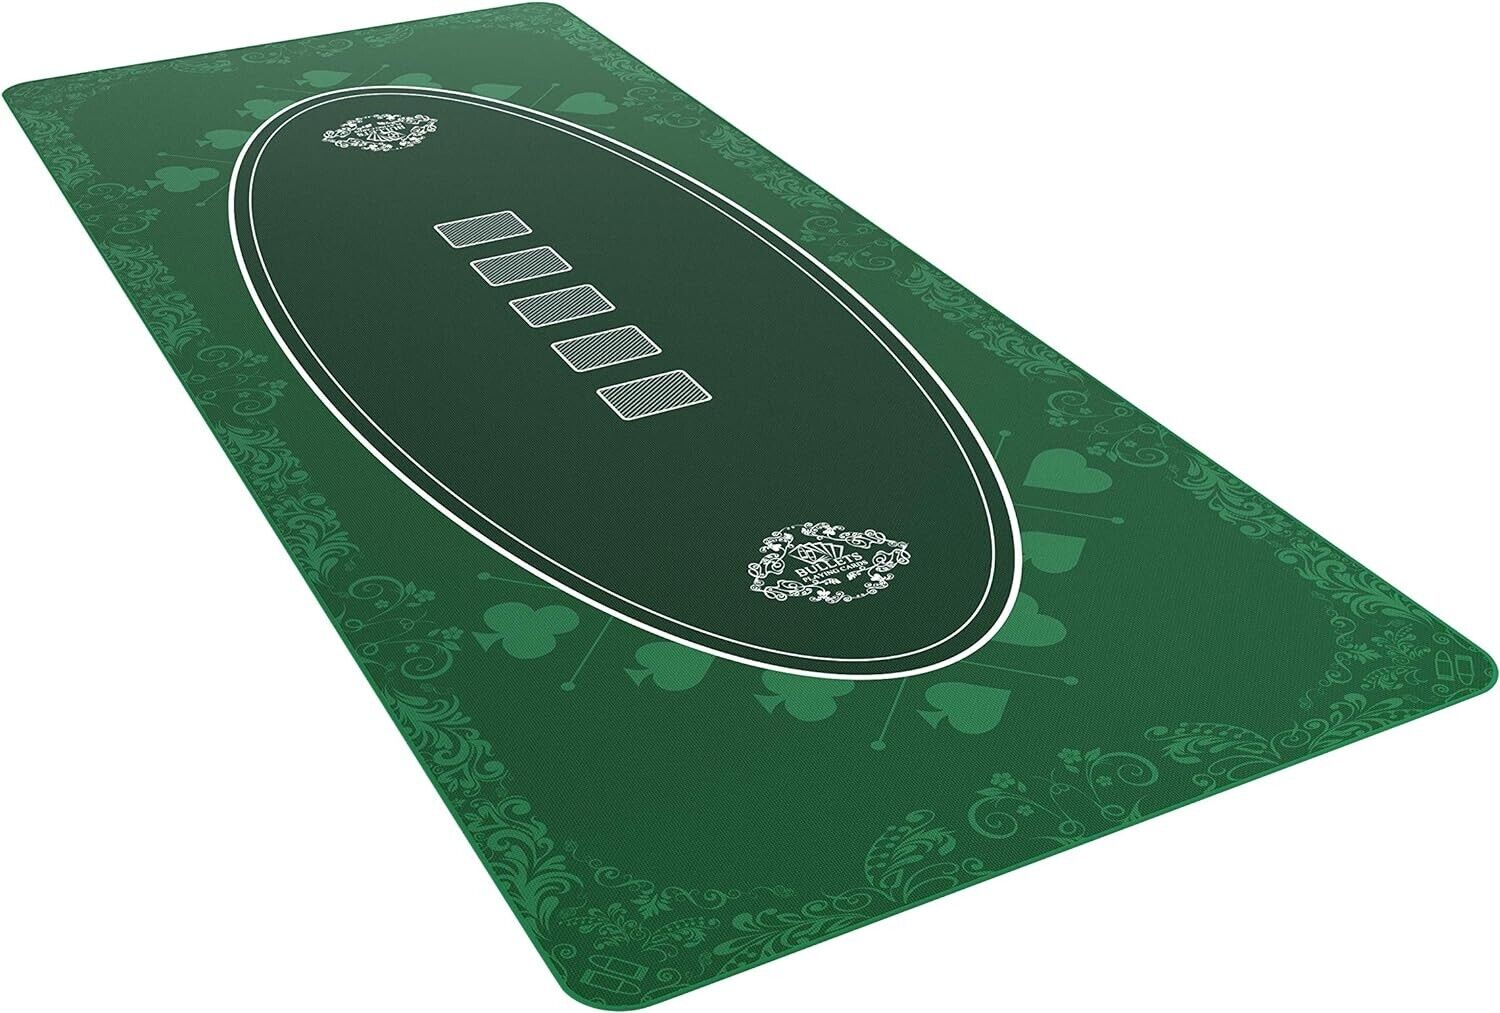 Bullets Playing Cards - Poker Layout - Table Top Mat 6 Foot x 30 inch - Delux...